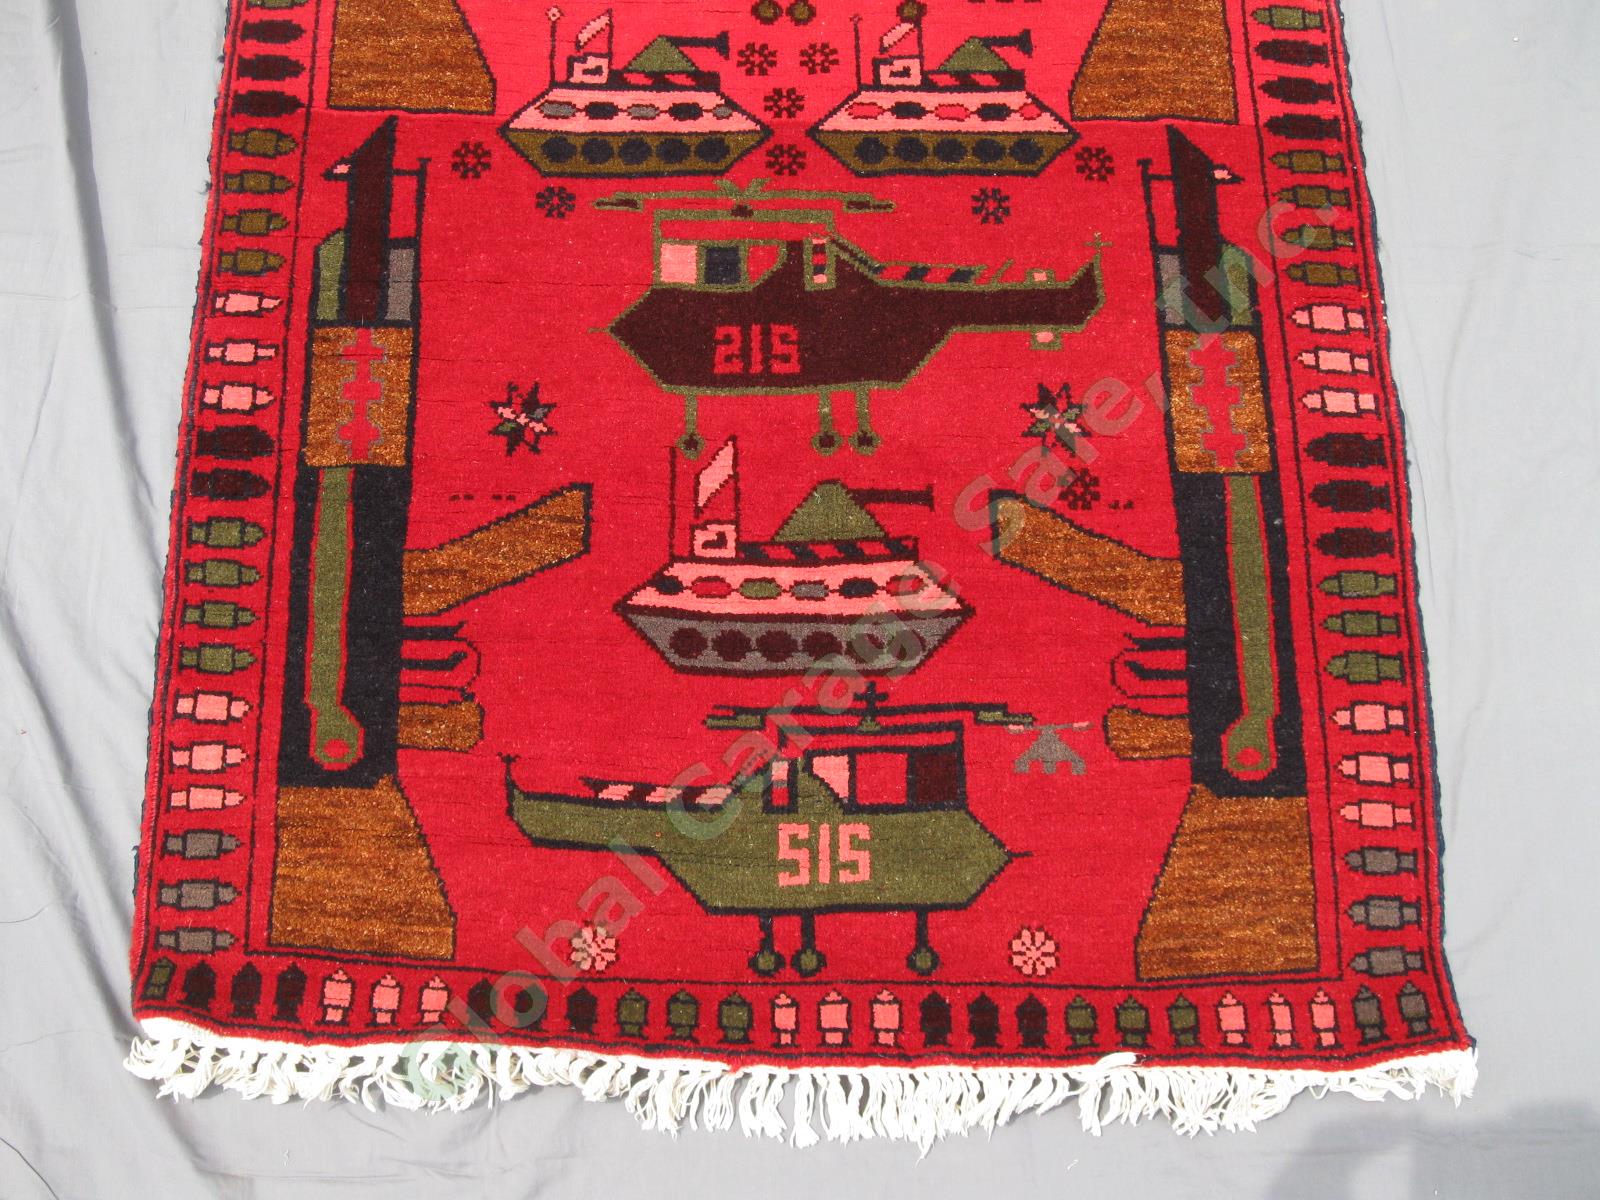 Authentic Afghan Tribal War Rug Circa 2007 Tanks Helicopters AK-47 38.5"x60" NR 2